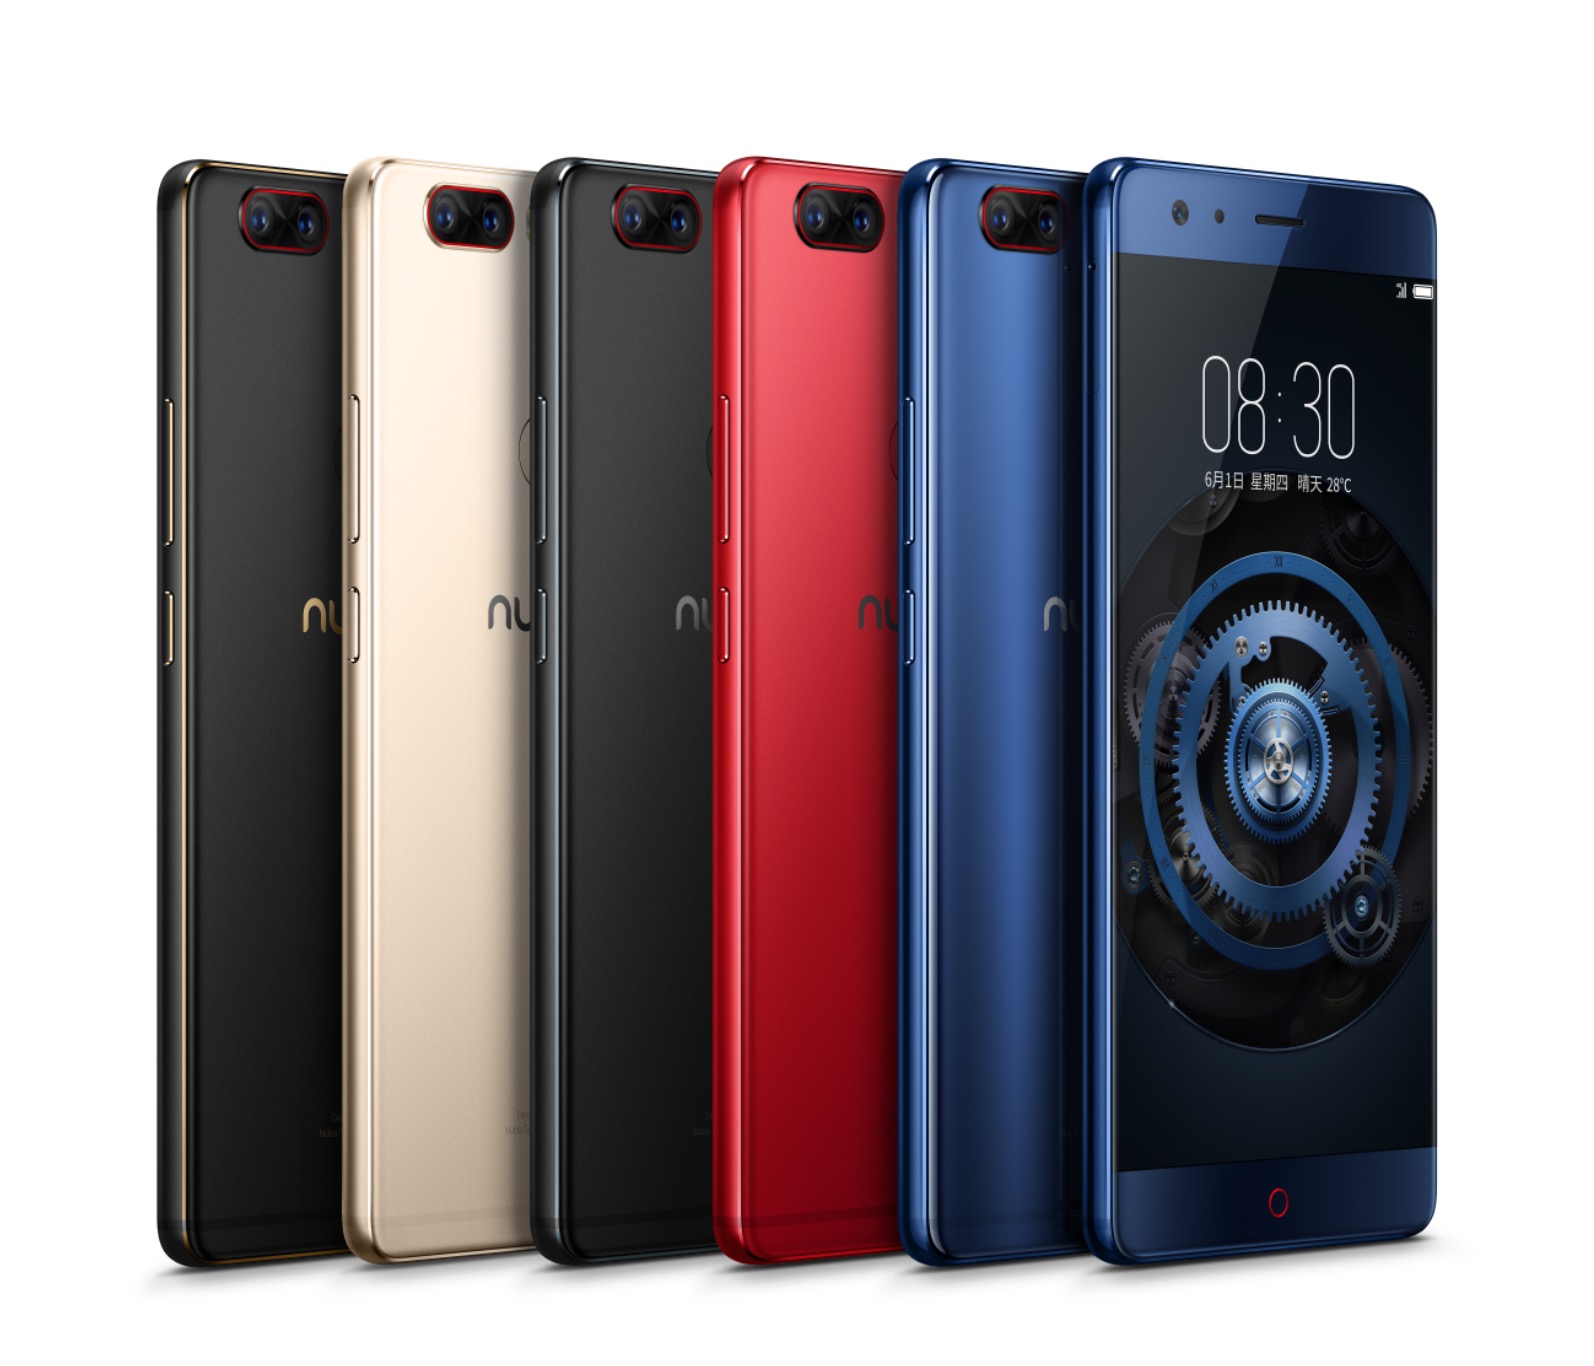 nubia Z17 To Make Official Appearance in Malaysia Next Week